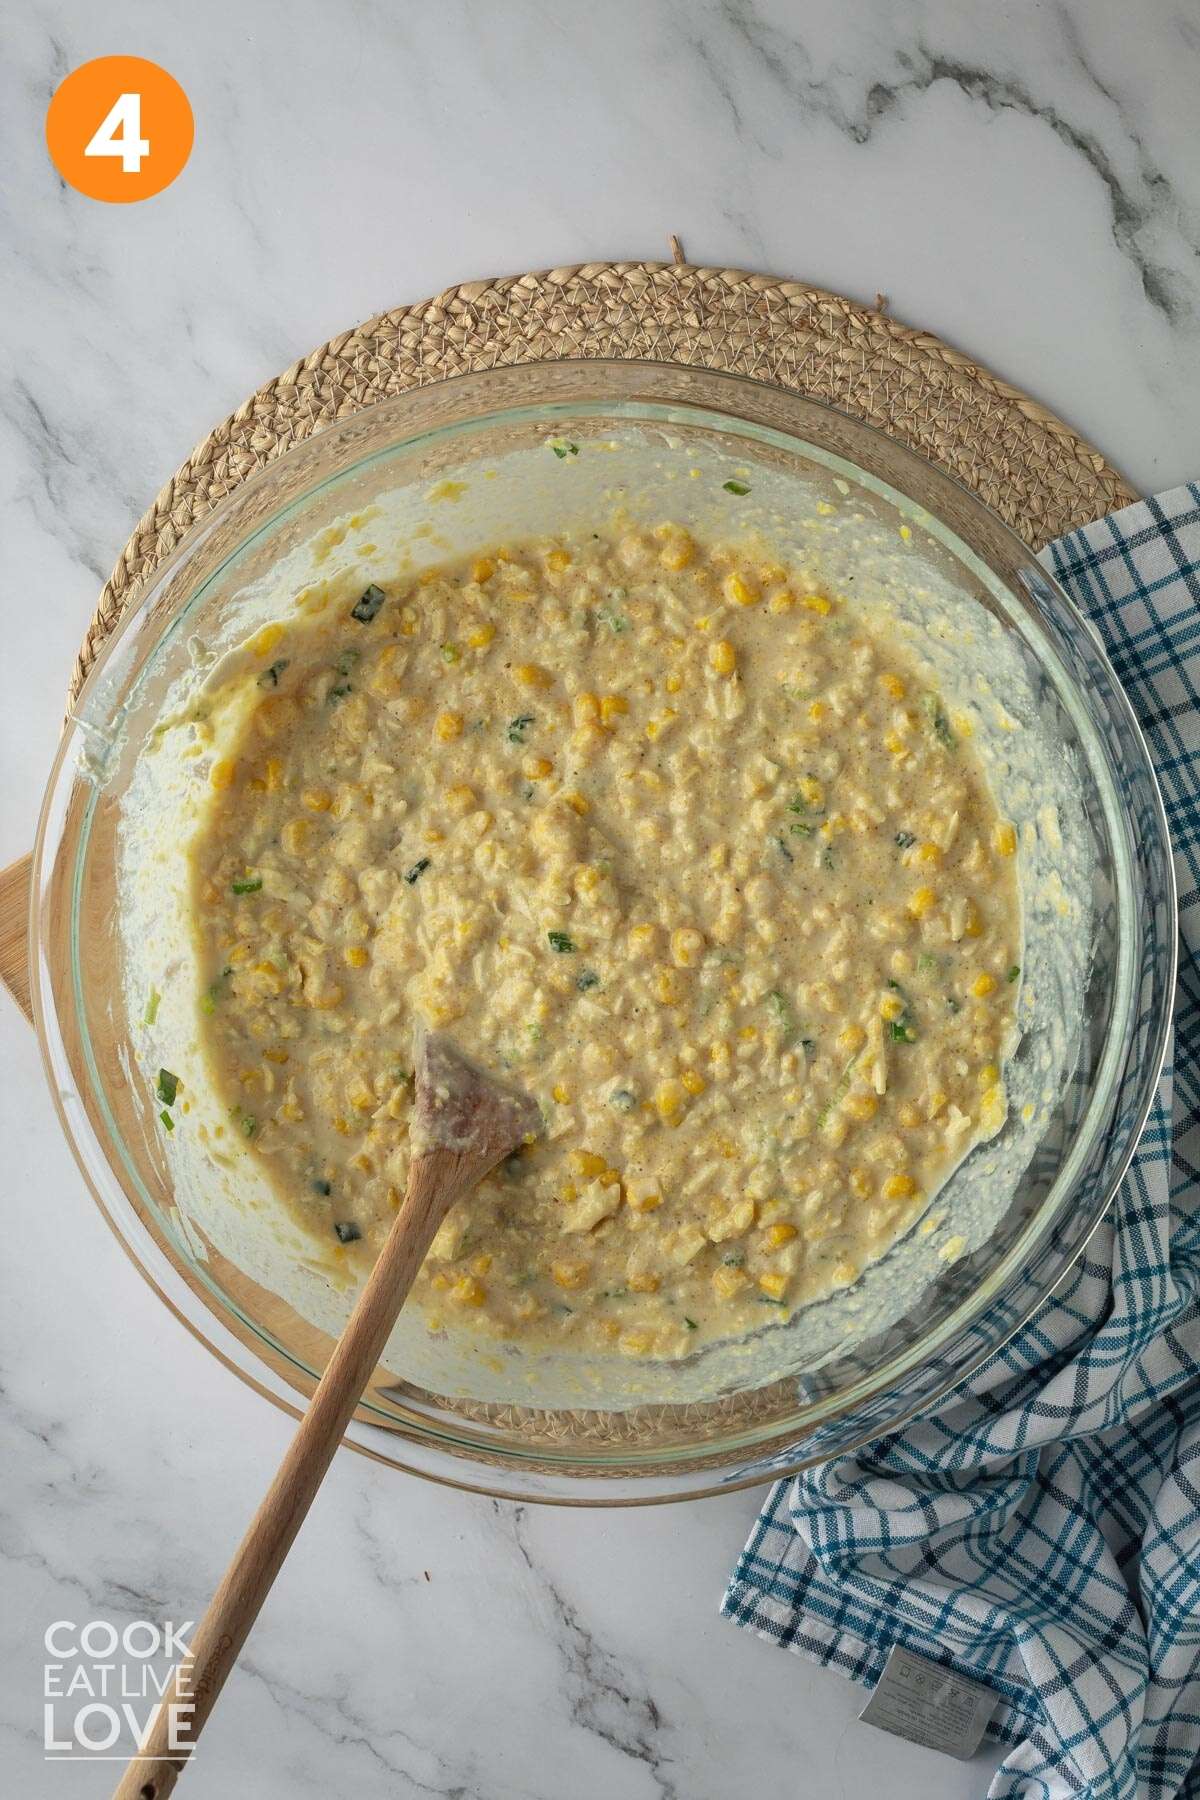 Flour, cornmeal, sugar, baking powder, vegan yogurt, cheese, milk, salt, pepper, drained corn, pureed corn, and cooked green onions in a large bowl after being mixed with a wooden spoon in it.